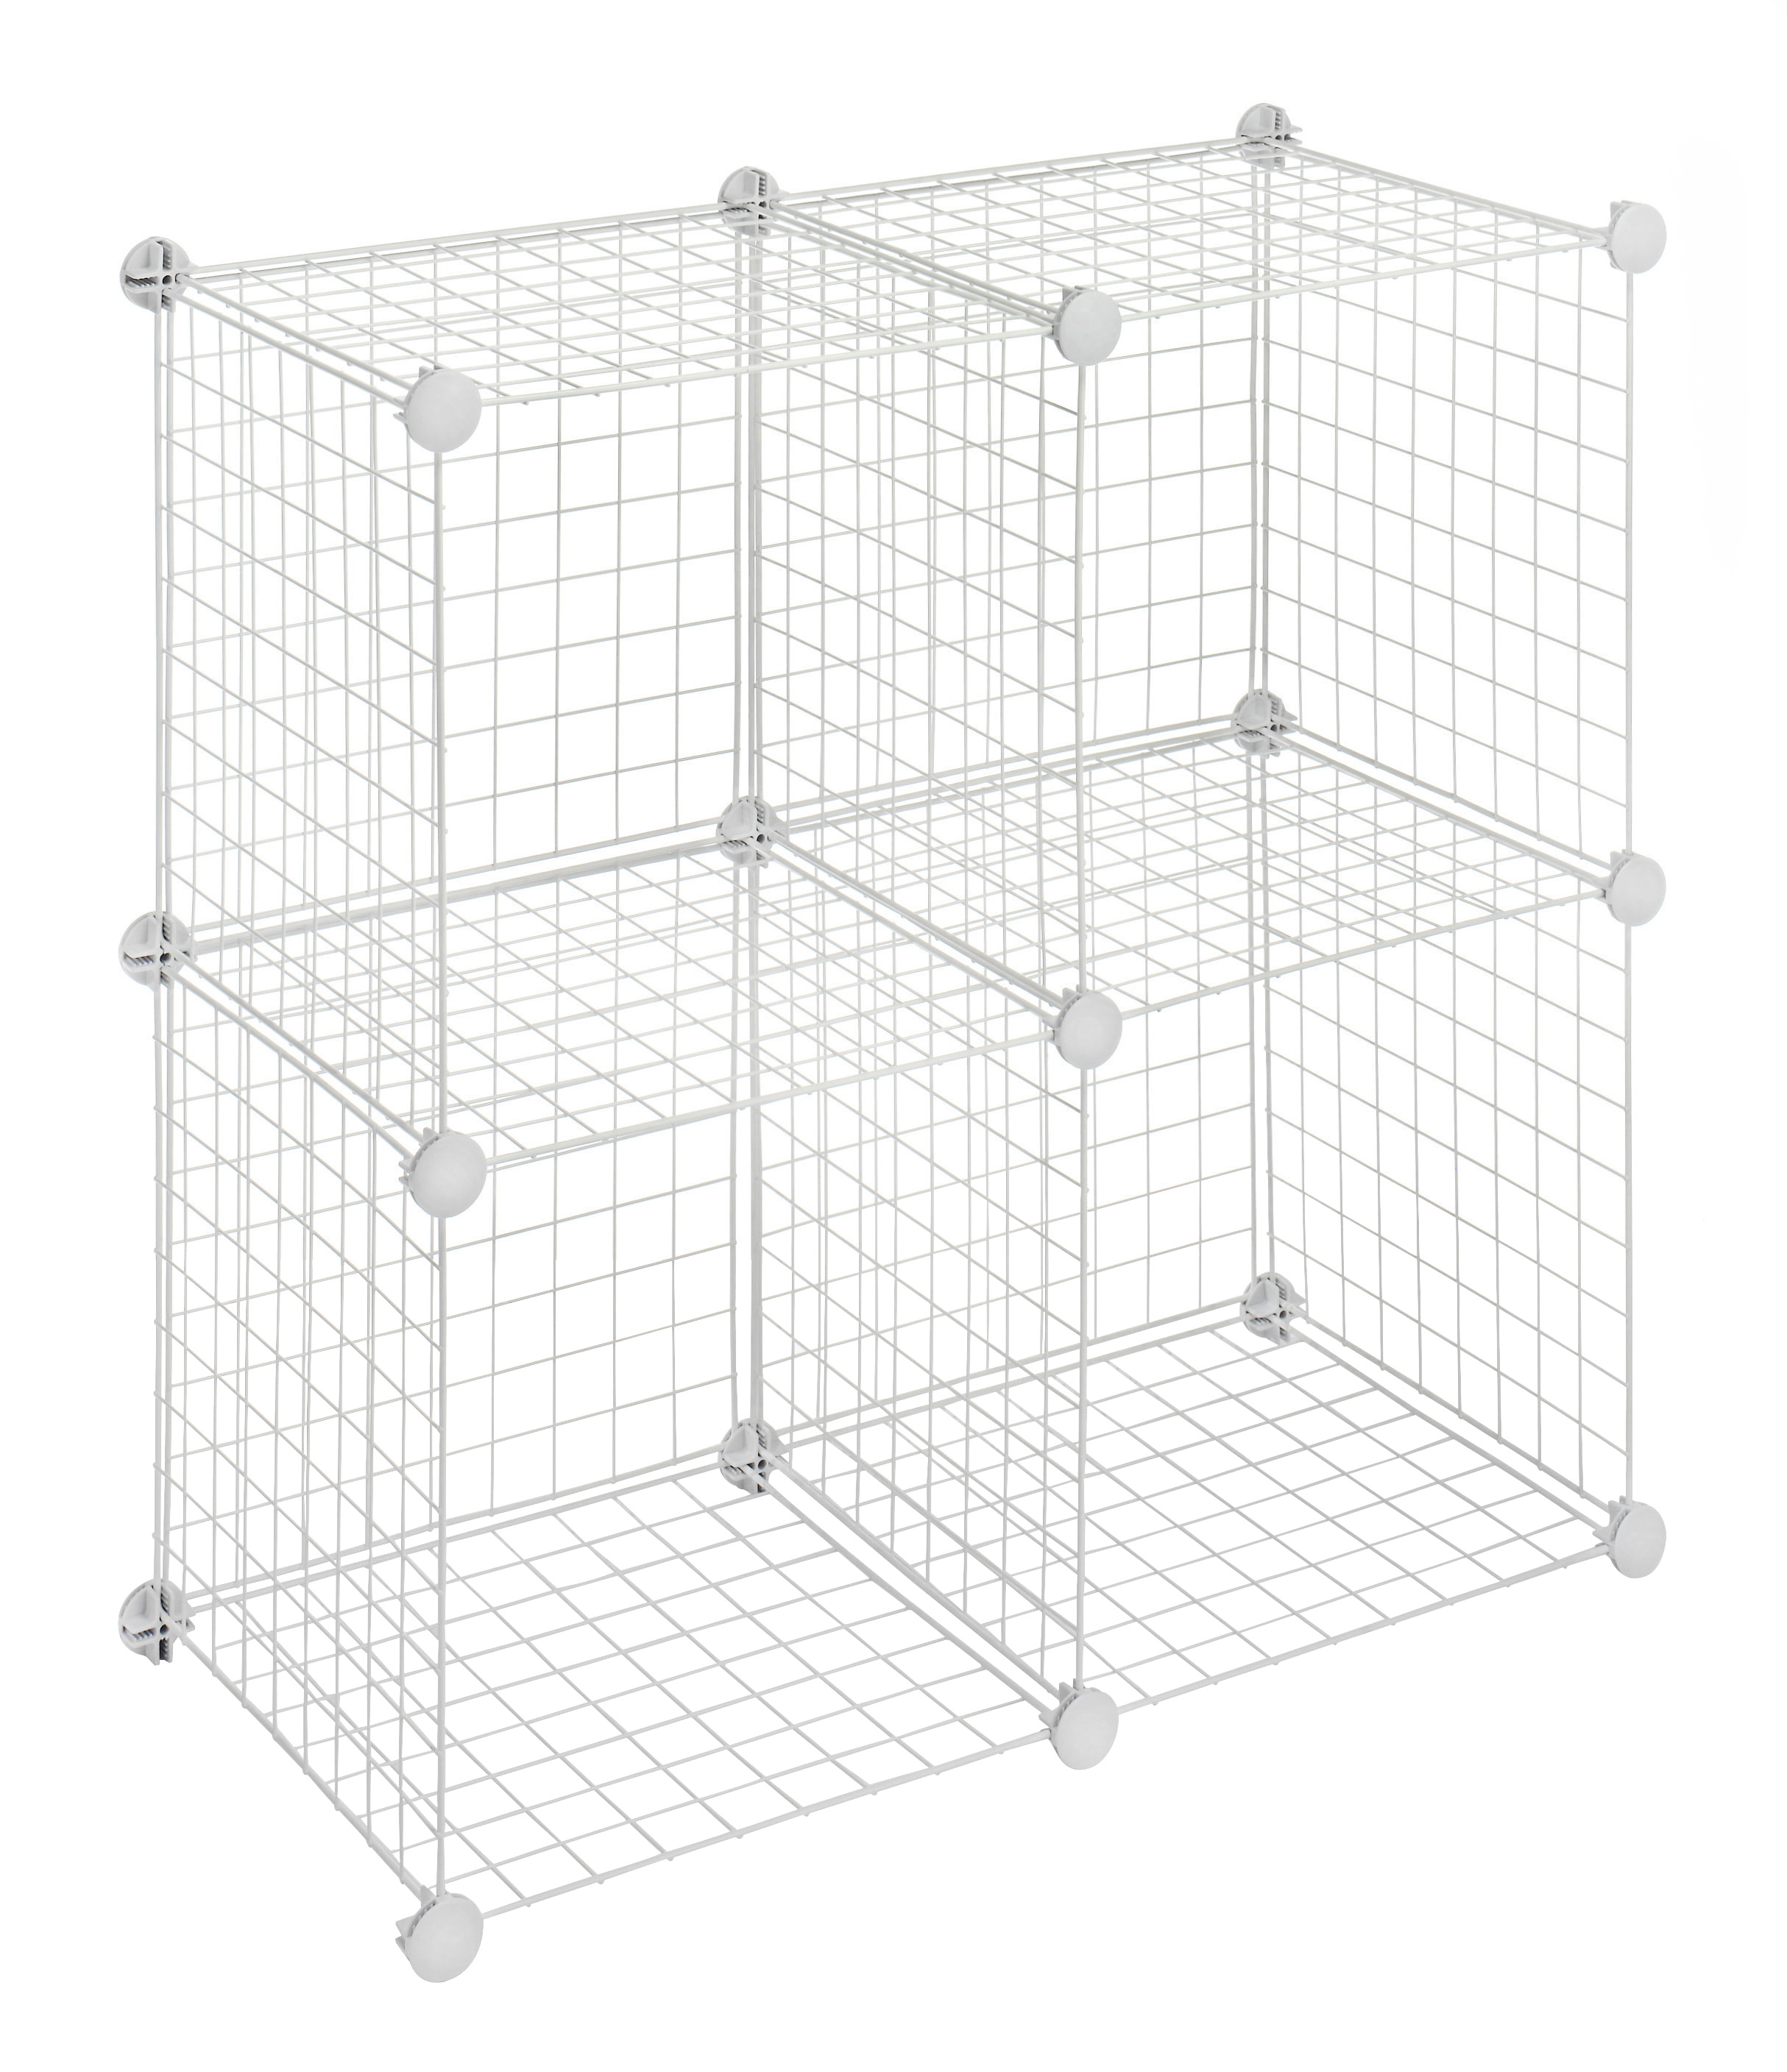 Whitmor Storage Cubes Stackable Interlocking Wire Shelves - White - Set of 4 - image 1 of 10